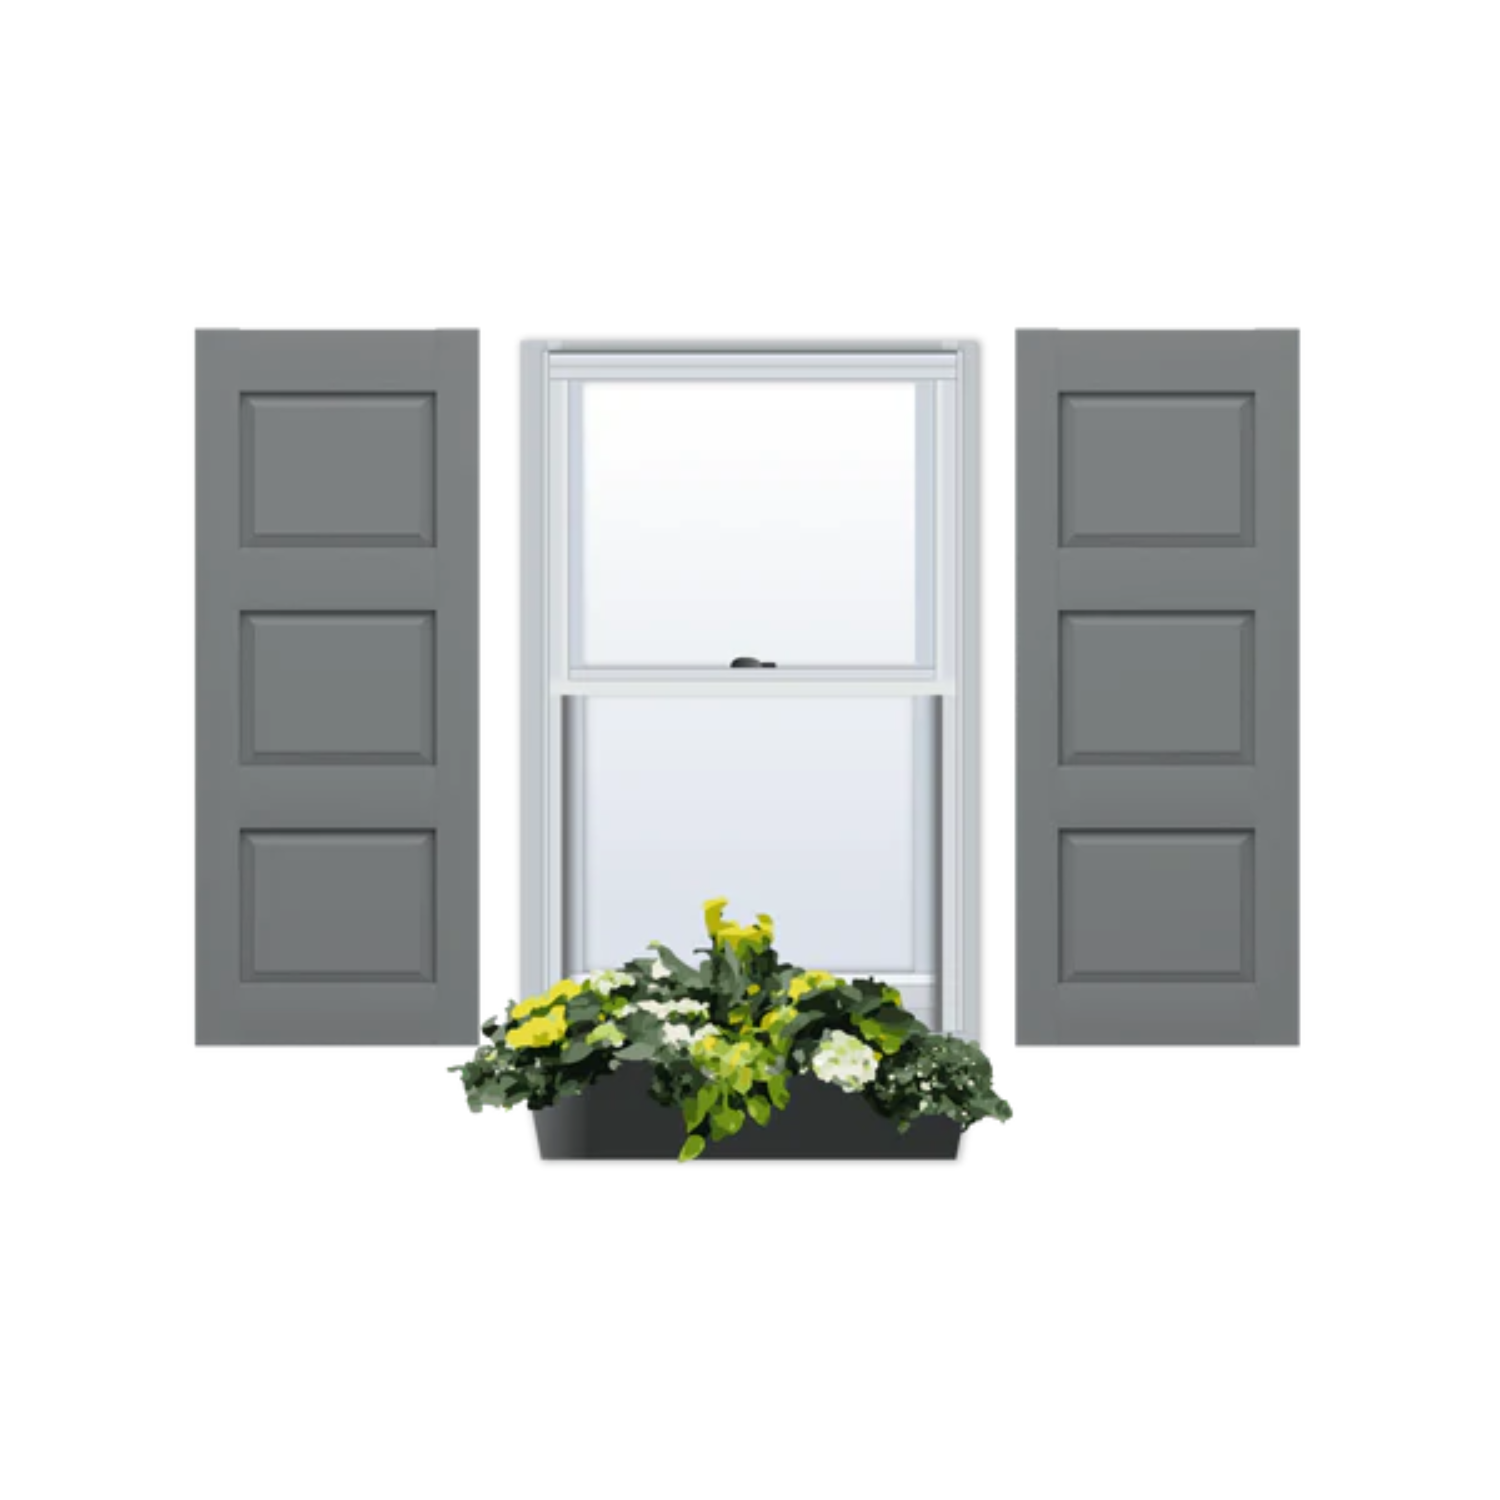 PVC | Raised Panel Exterior Shutters | Three Equal Sections | 1 Pair